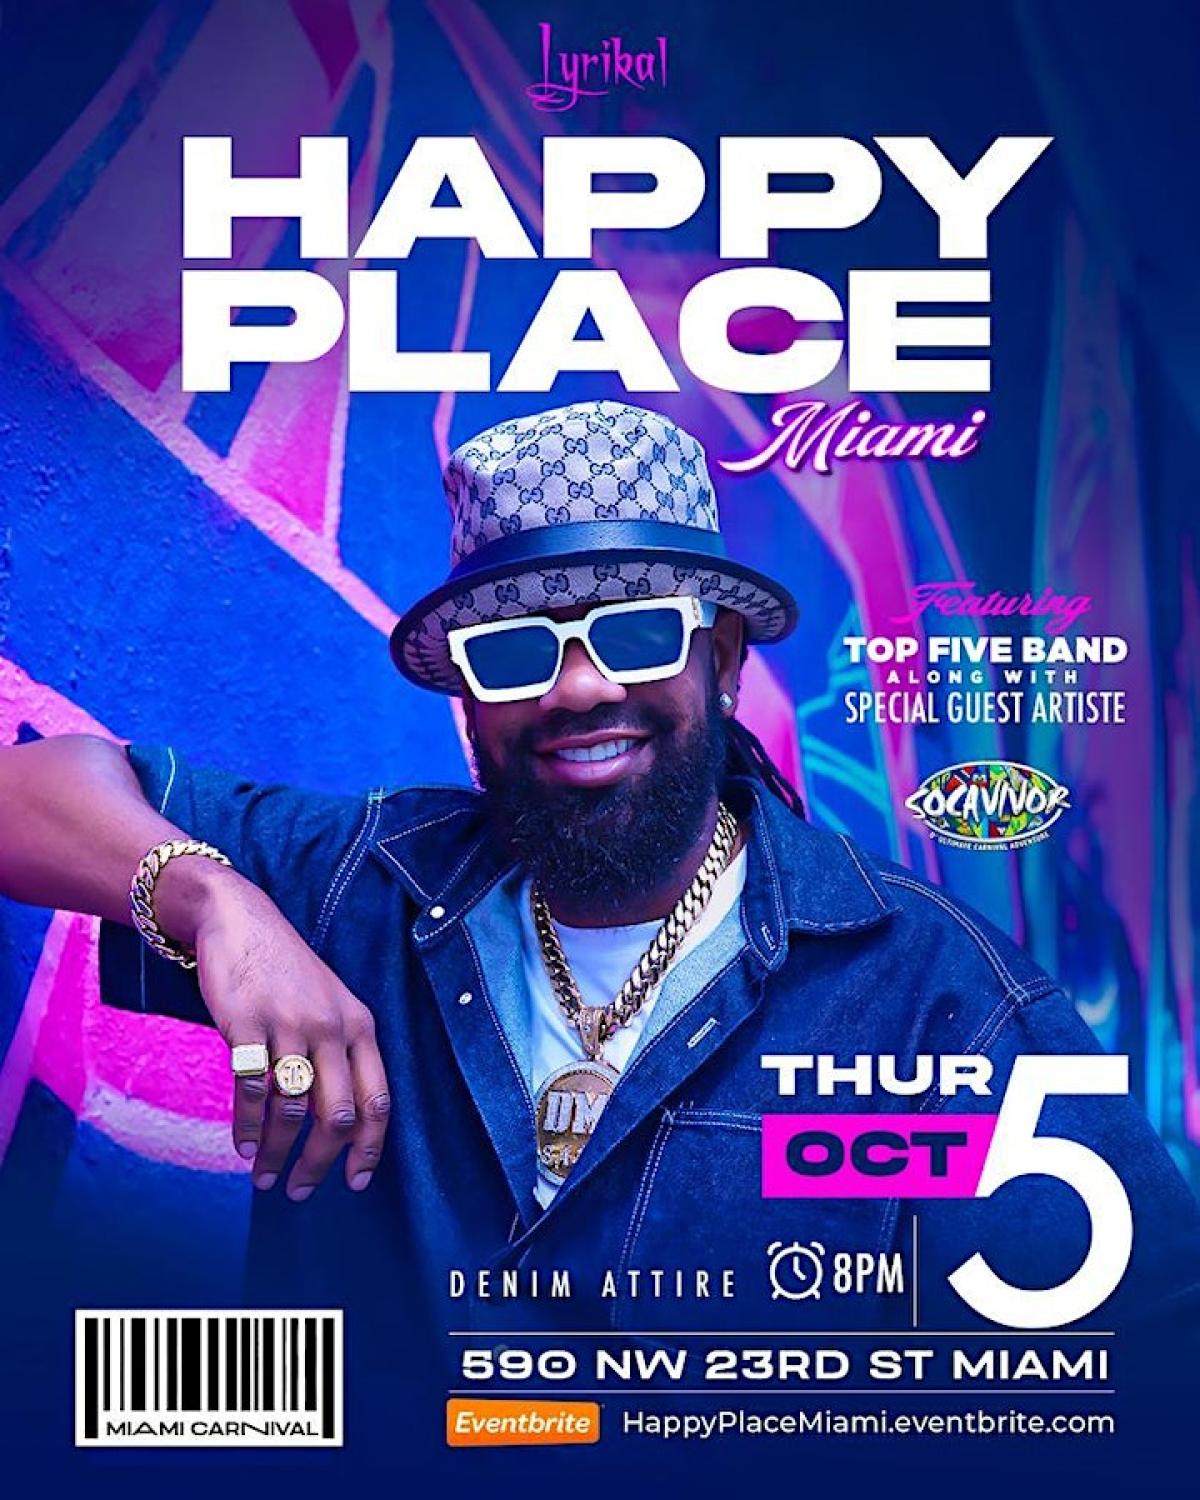 Happy Place flyer or graphic.